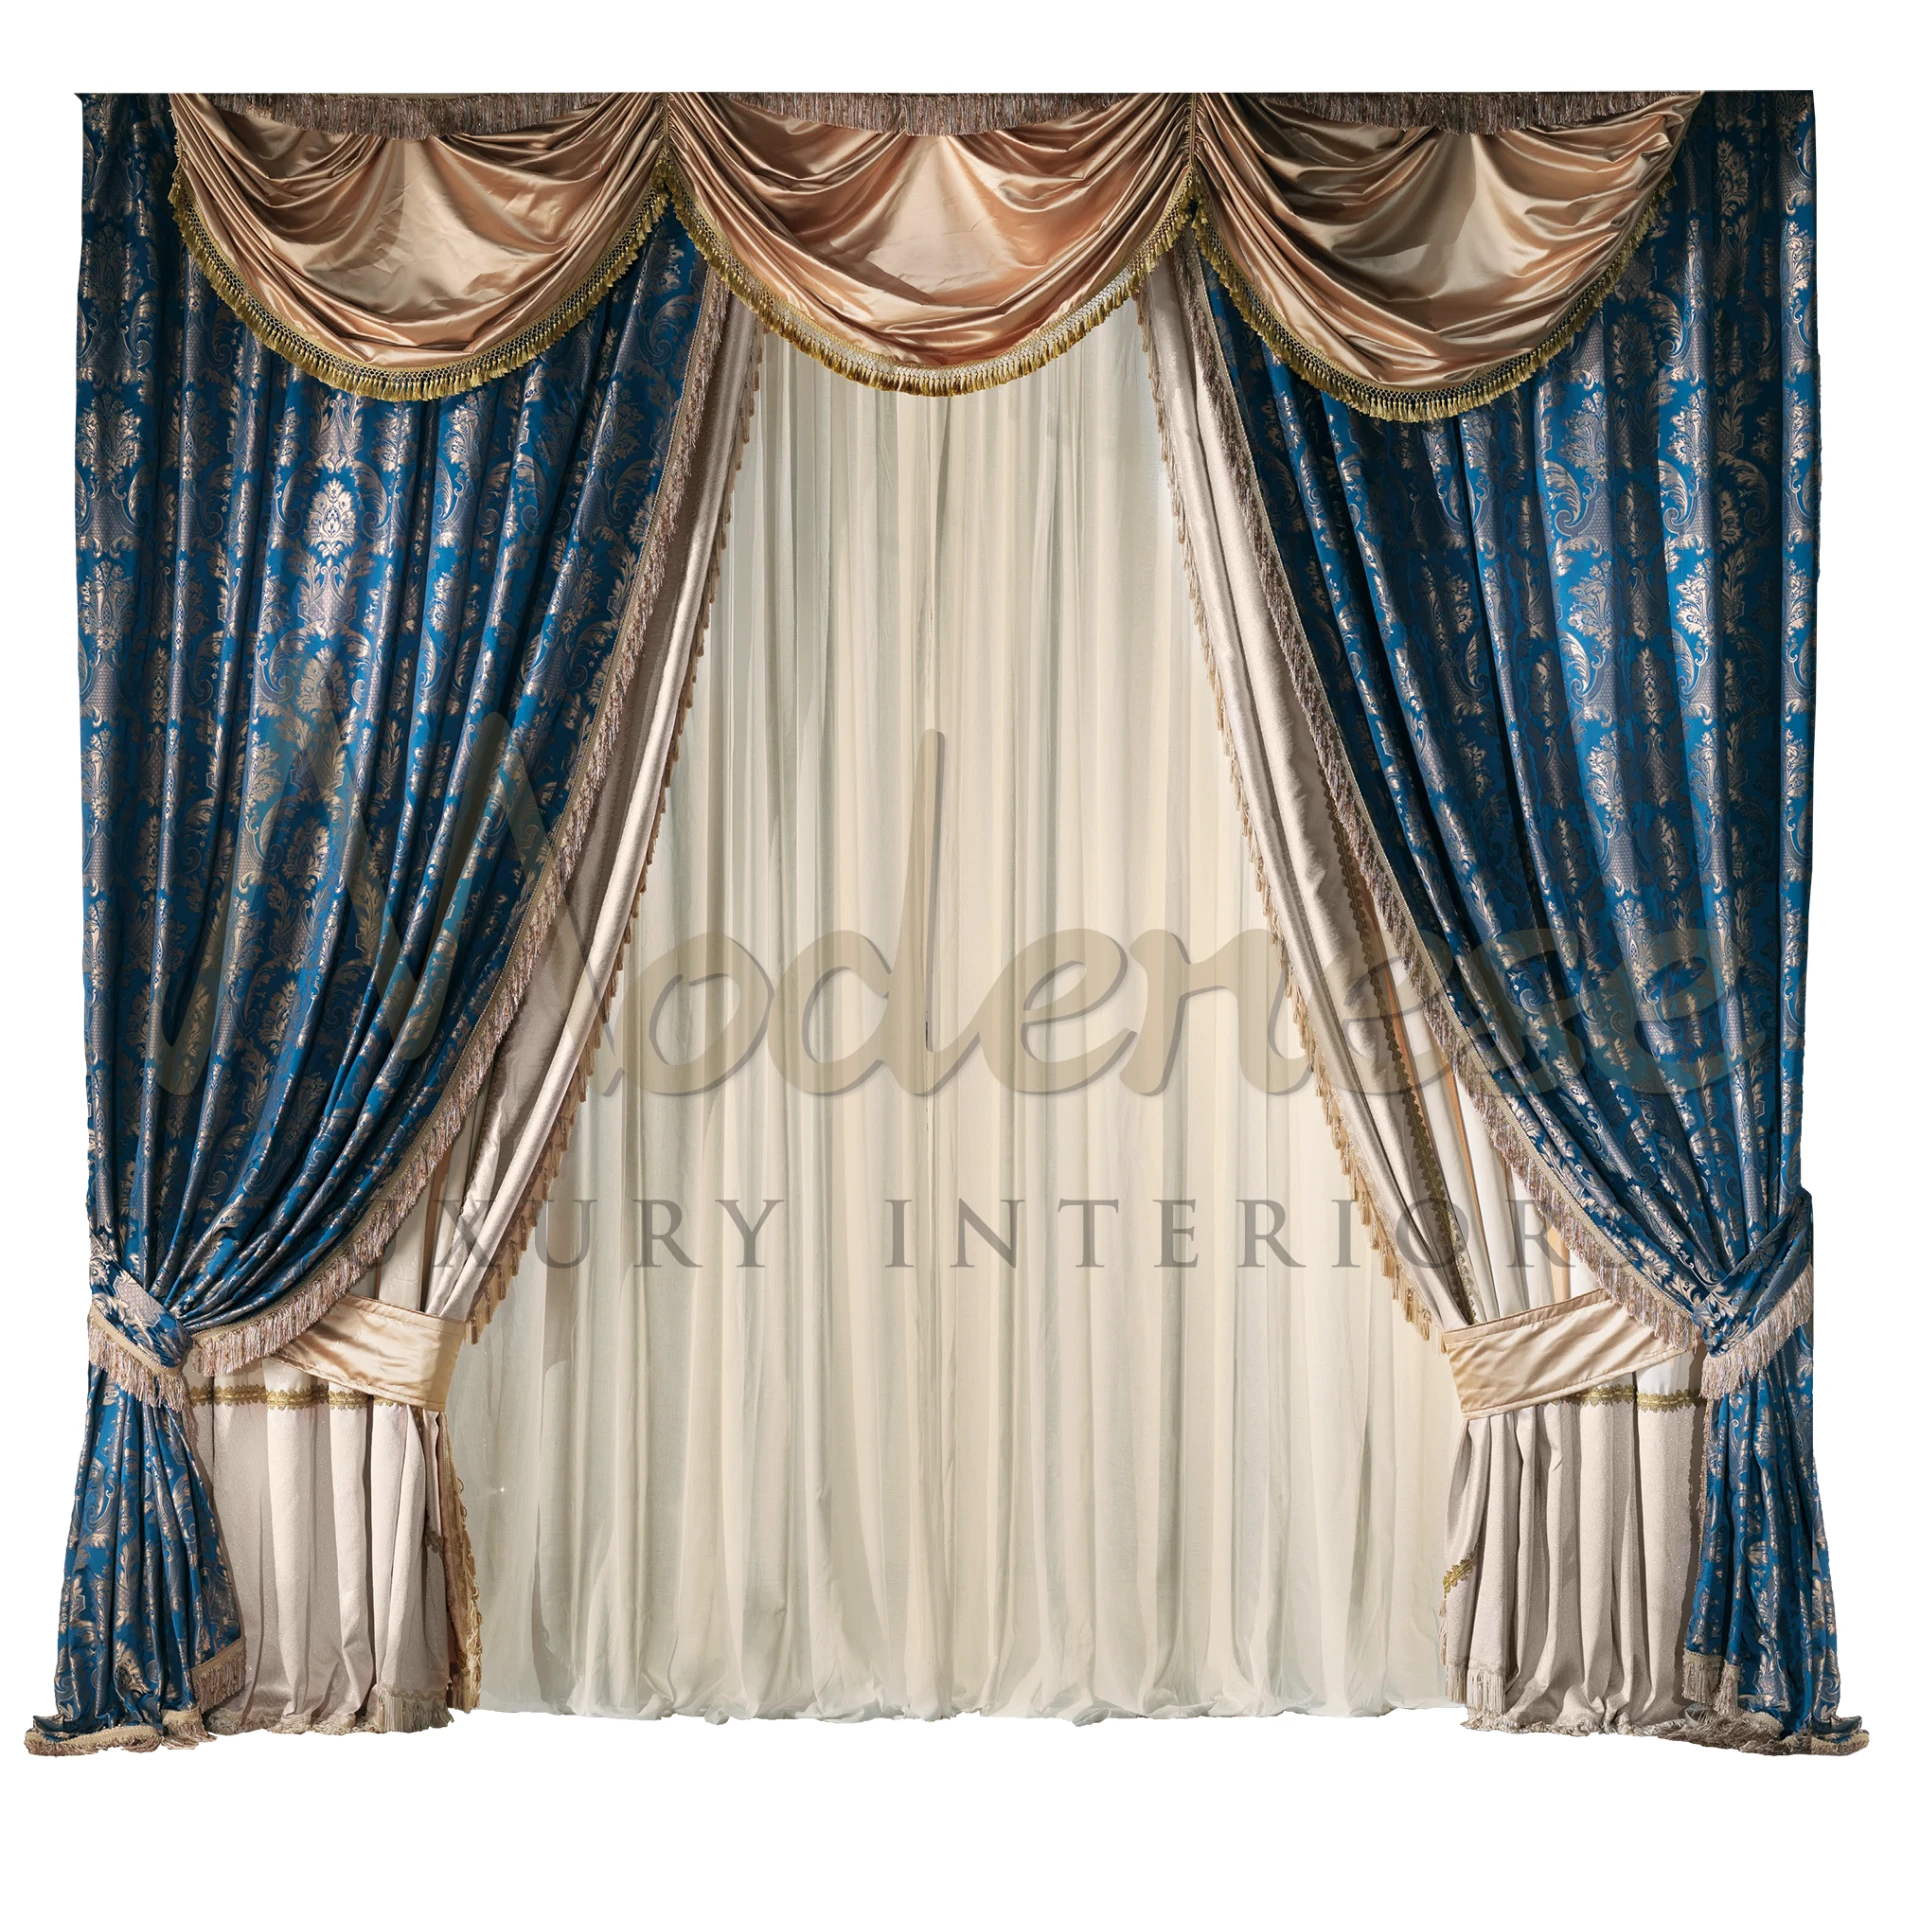 Royal Blue Classical Curtains in an interior, offering a regal and sophisticated touch with their deep, opulent color and design.